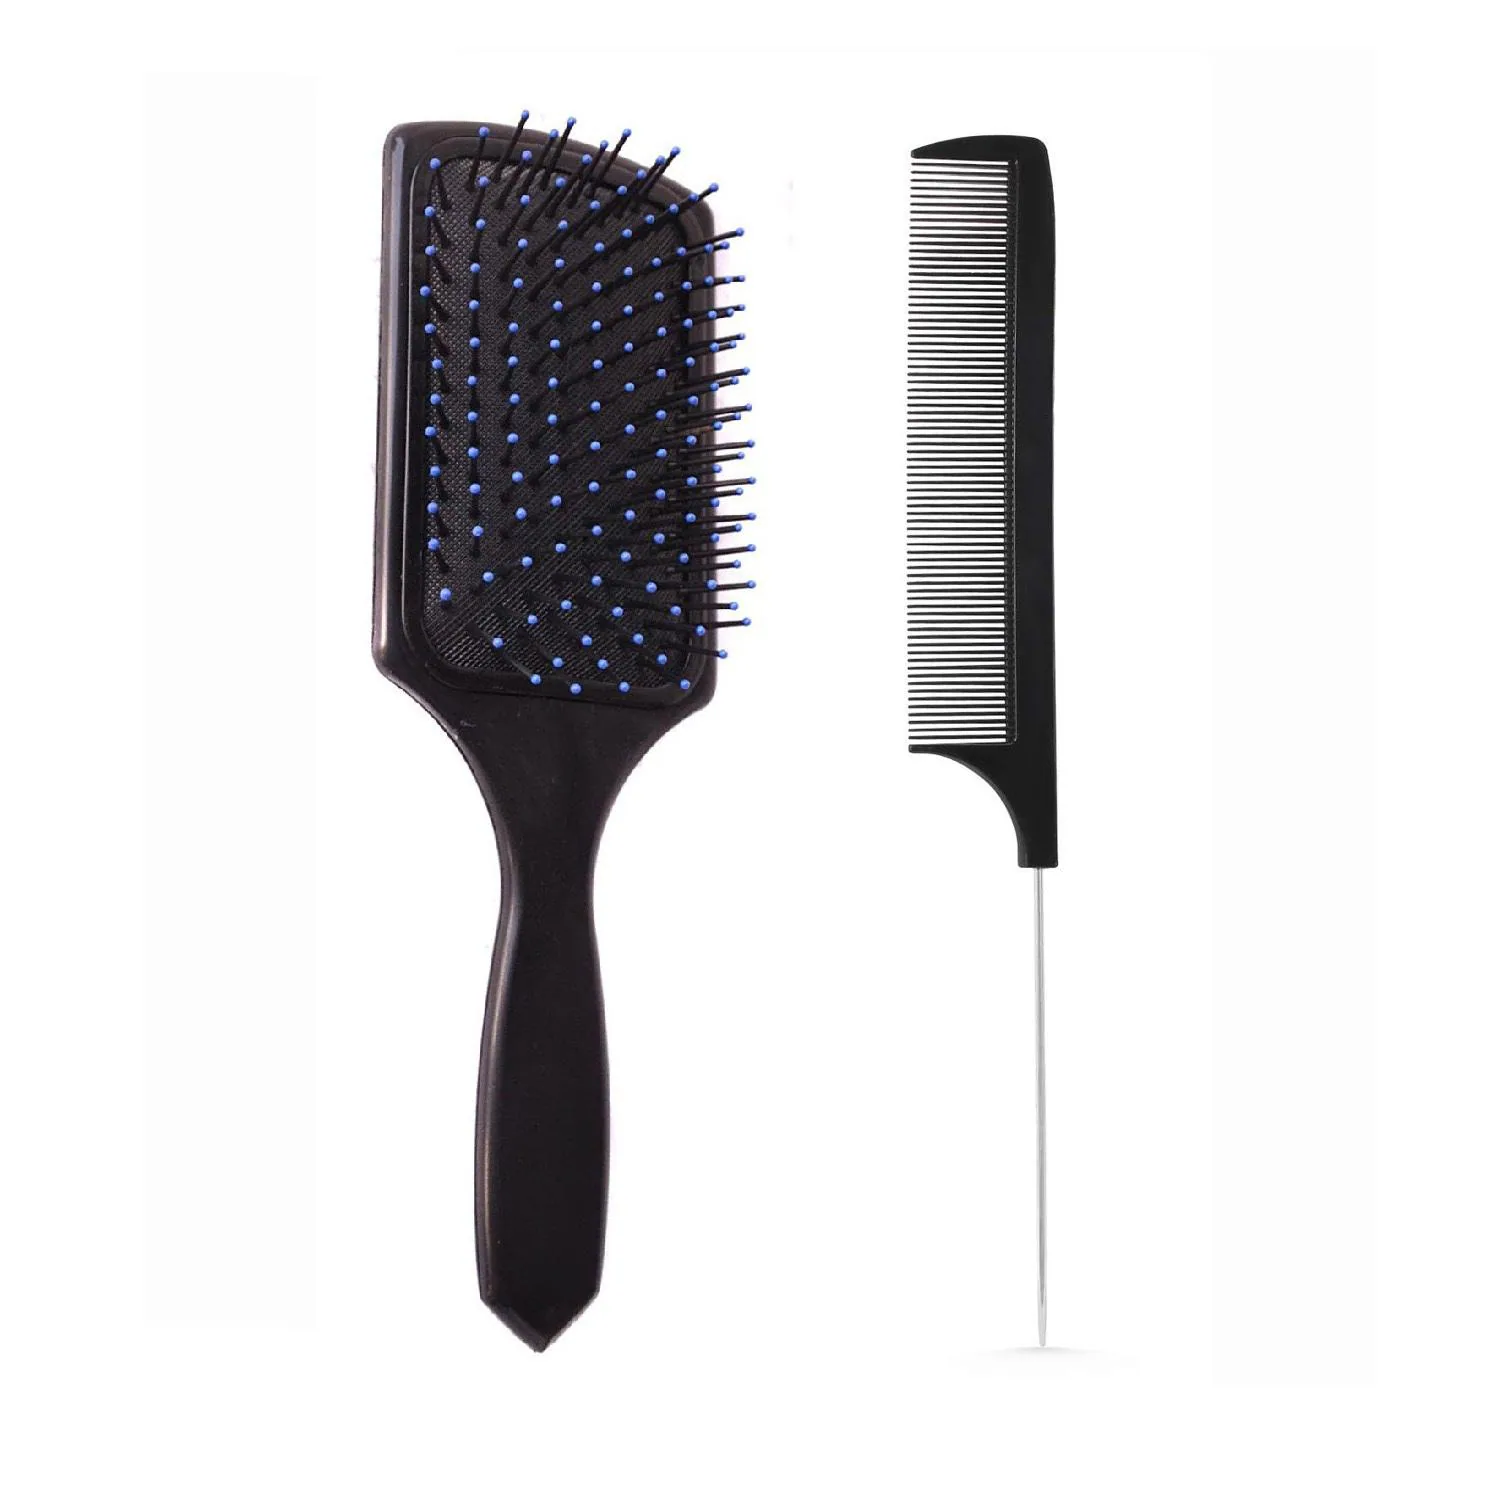 E-DUNIA Best Hair Brush Combo of Black Carbon Rat Tail comb With Steel  handle & Paddle Hair Brush with Soft Nylon Bristles for Women and Men -  JioMart